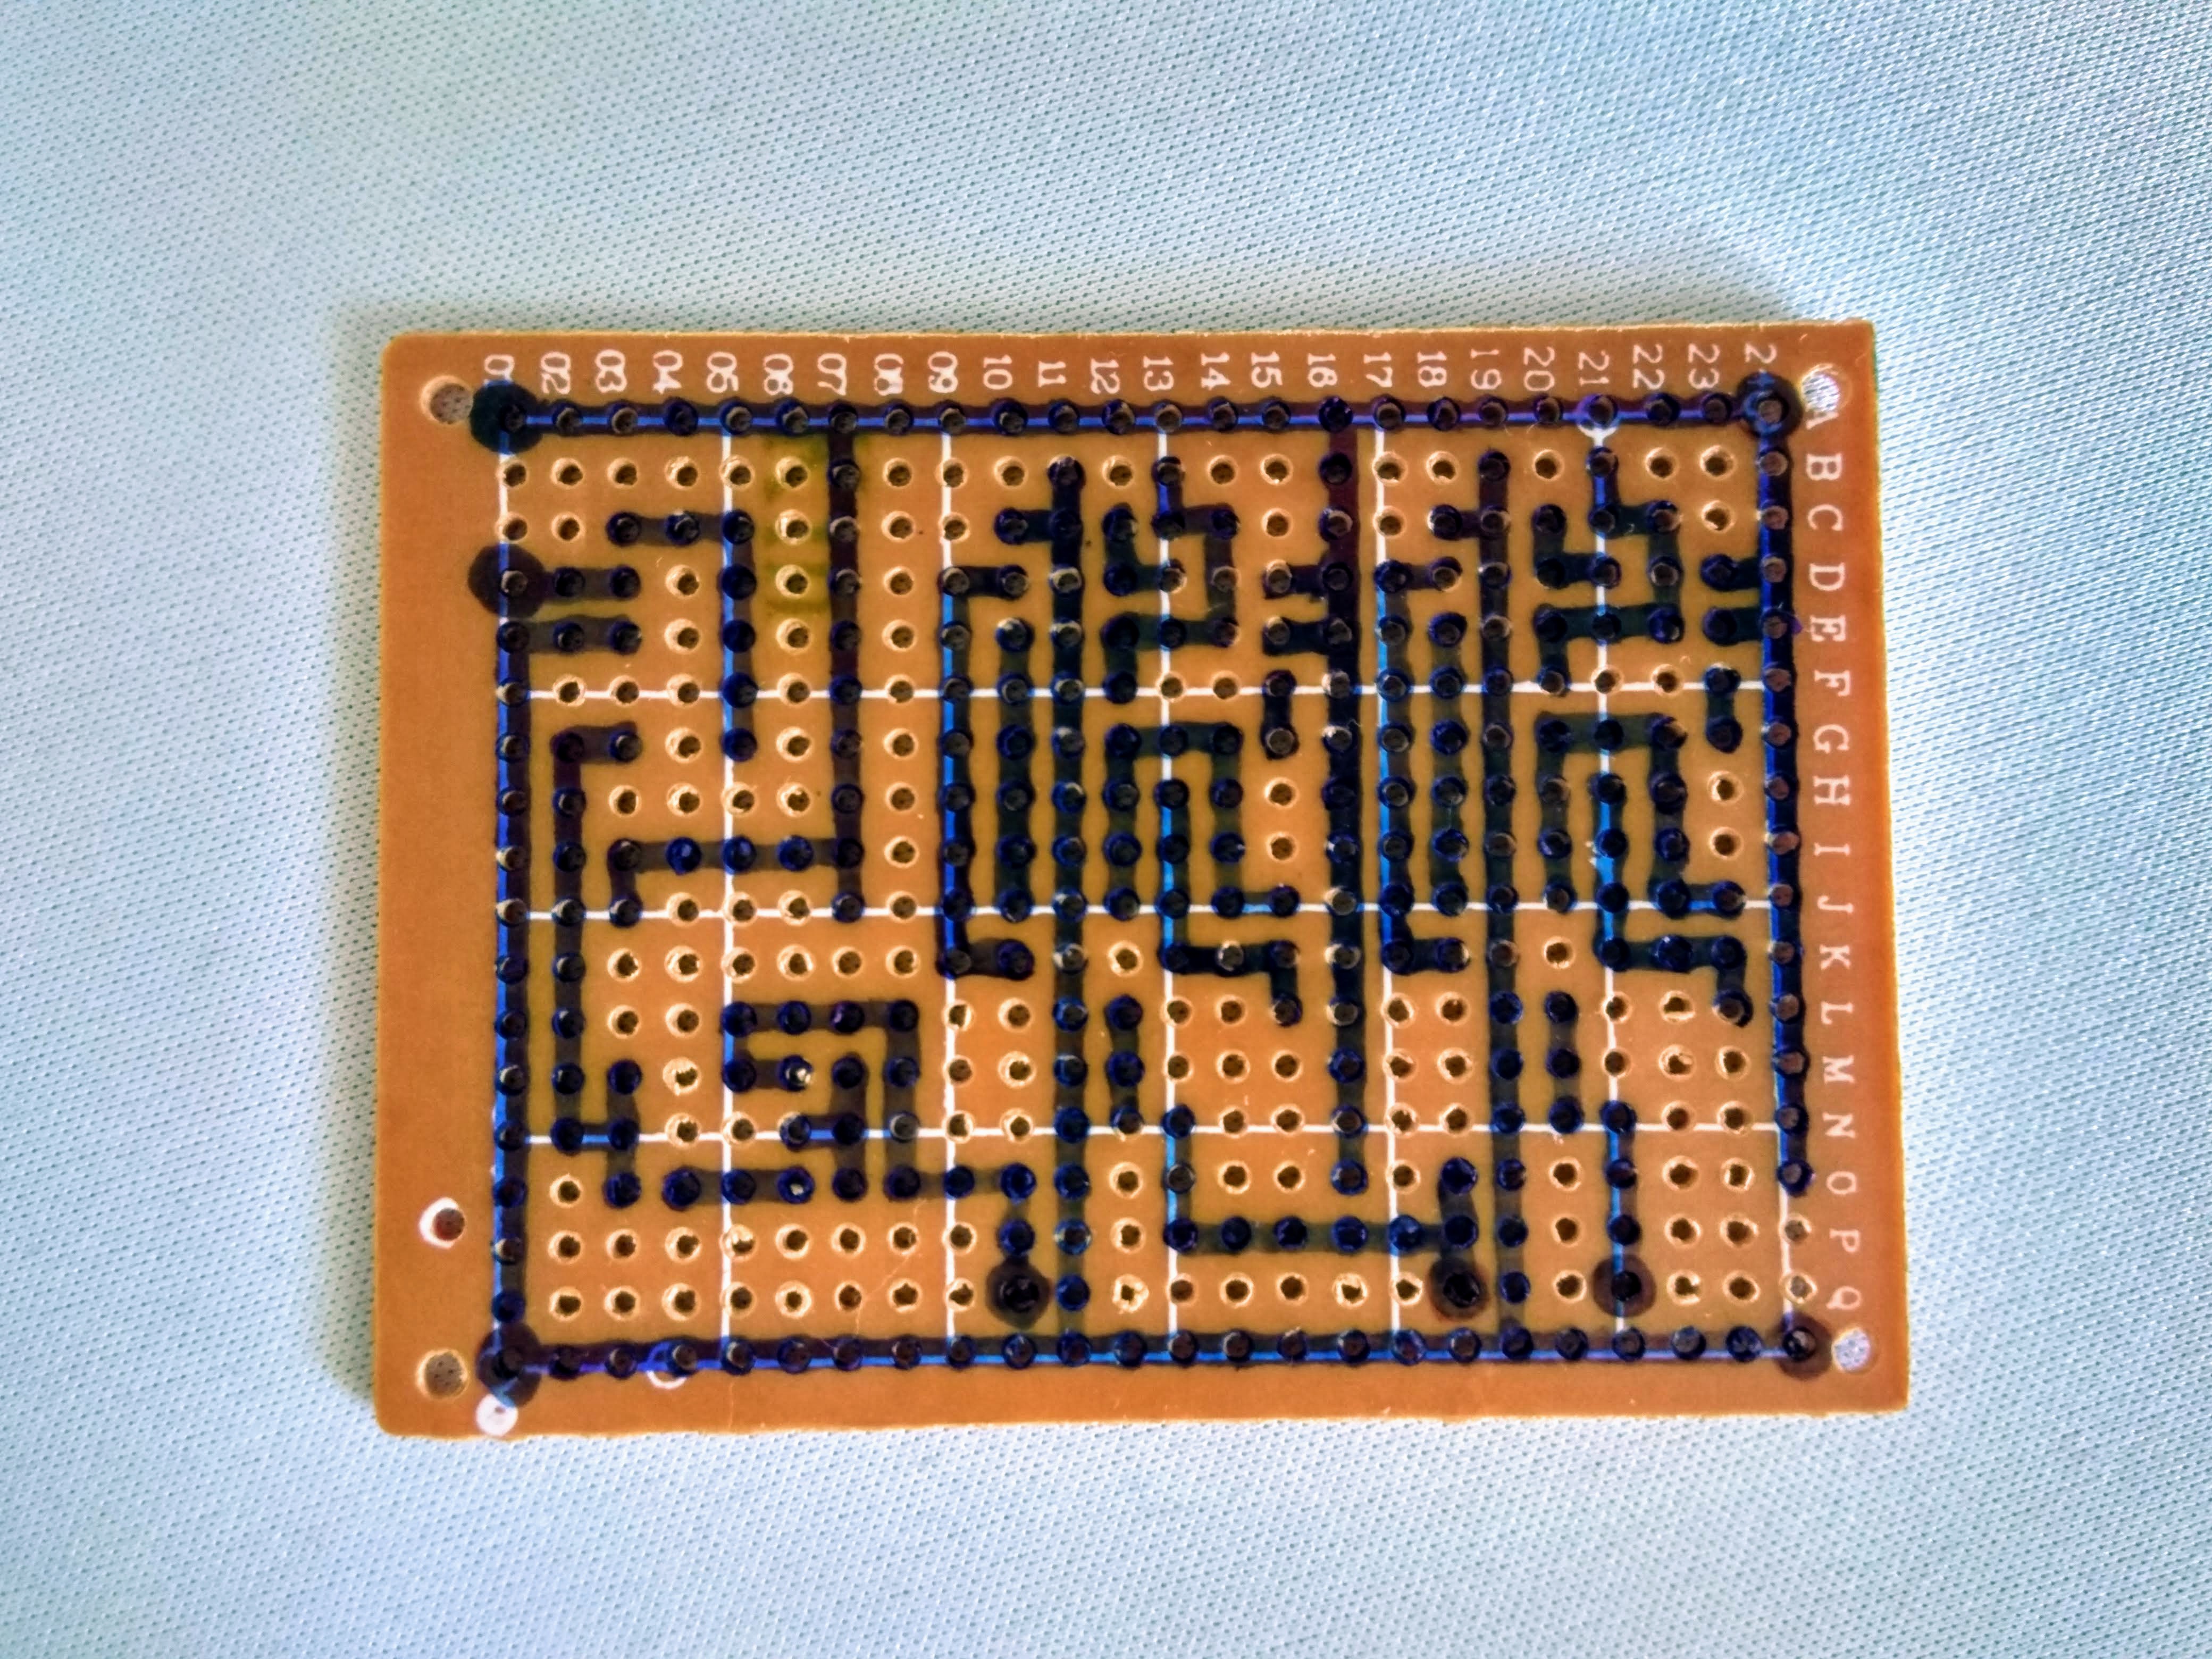 Tracks on the Audio-to-Serial converter PCB